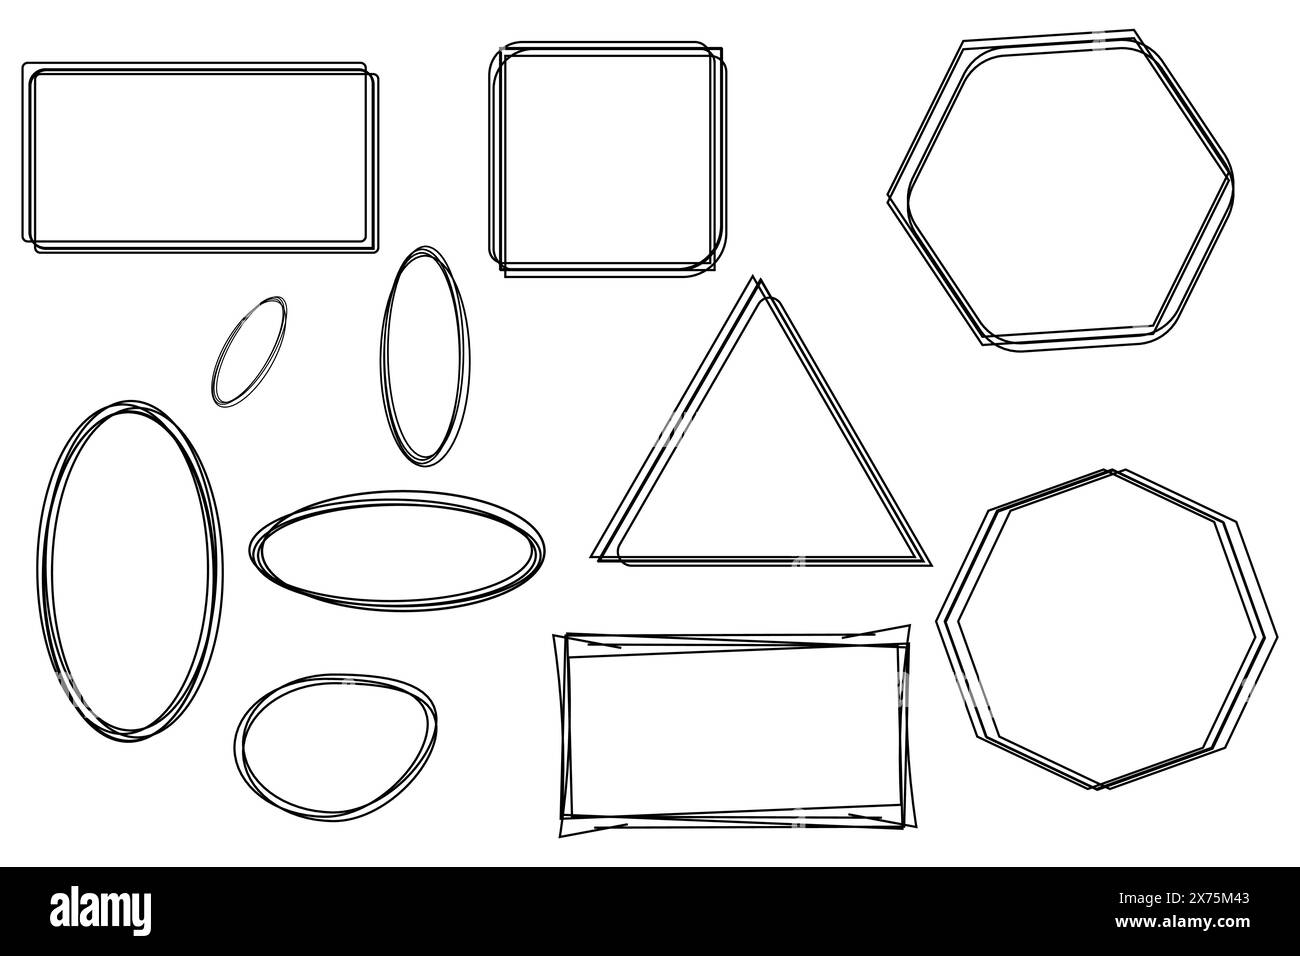 Hand drawn different shapes and line art. Doodles for artwork. Stock Vector